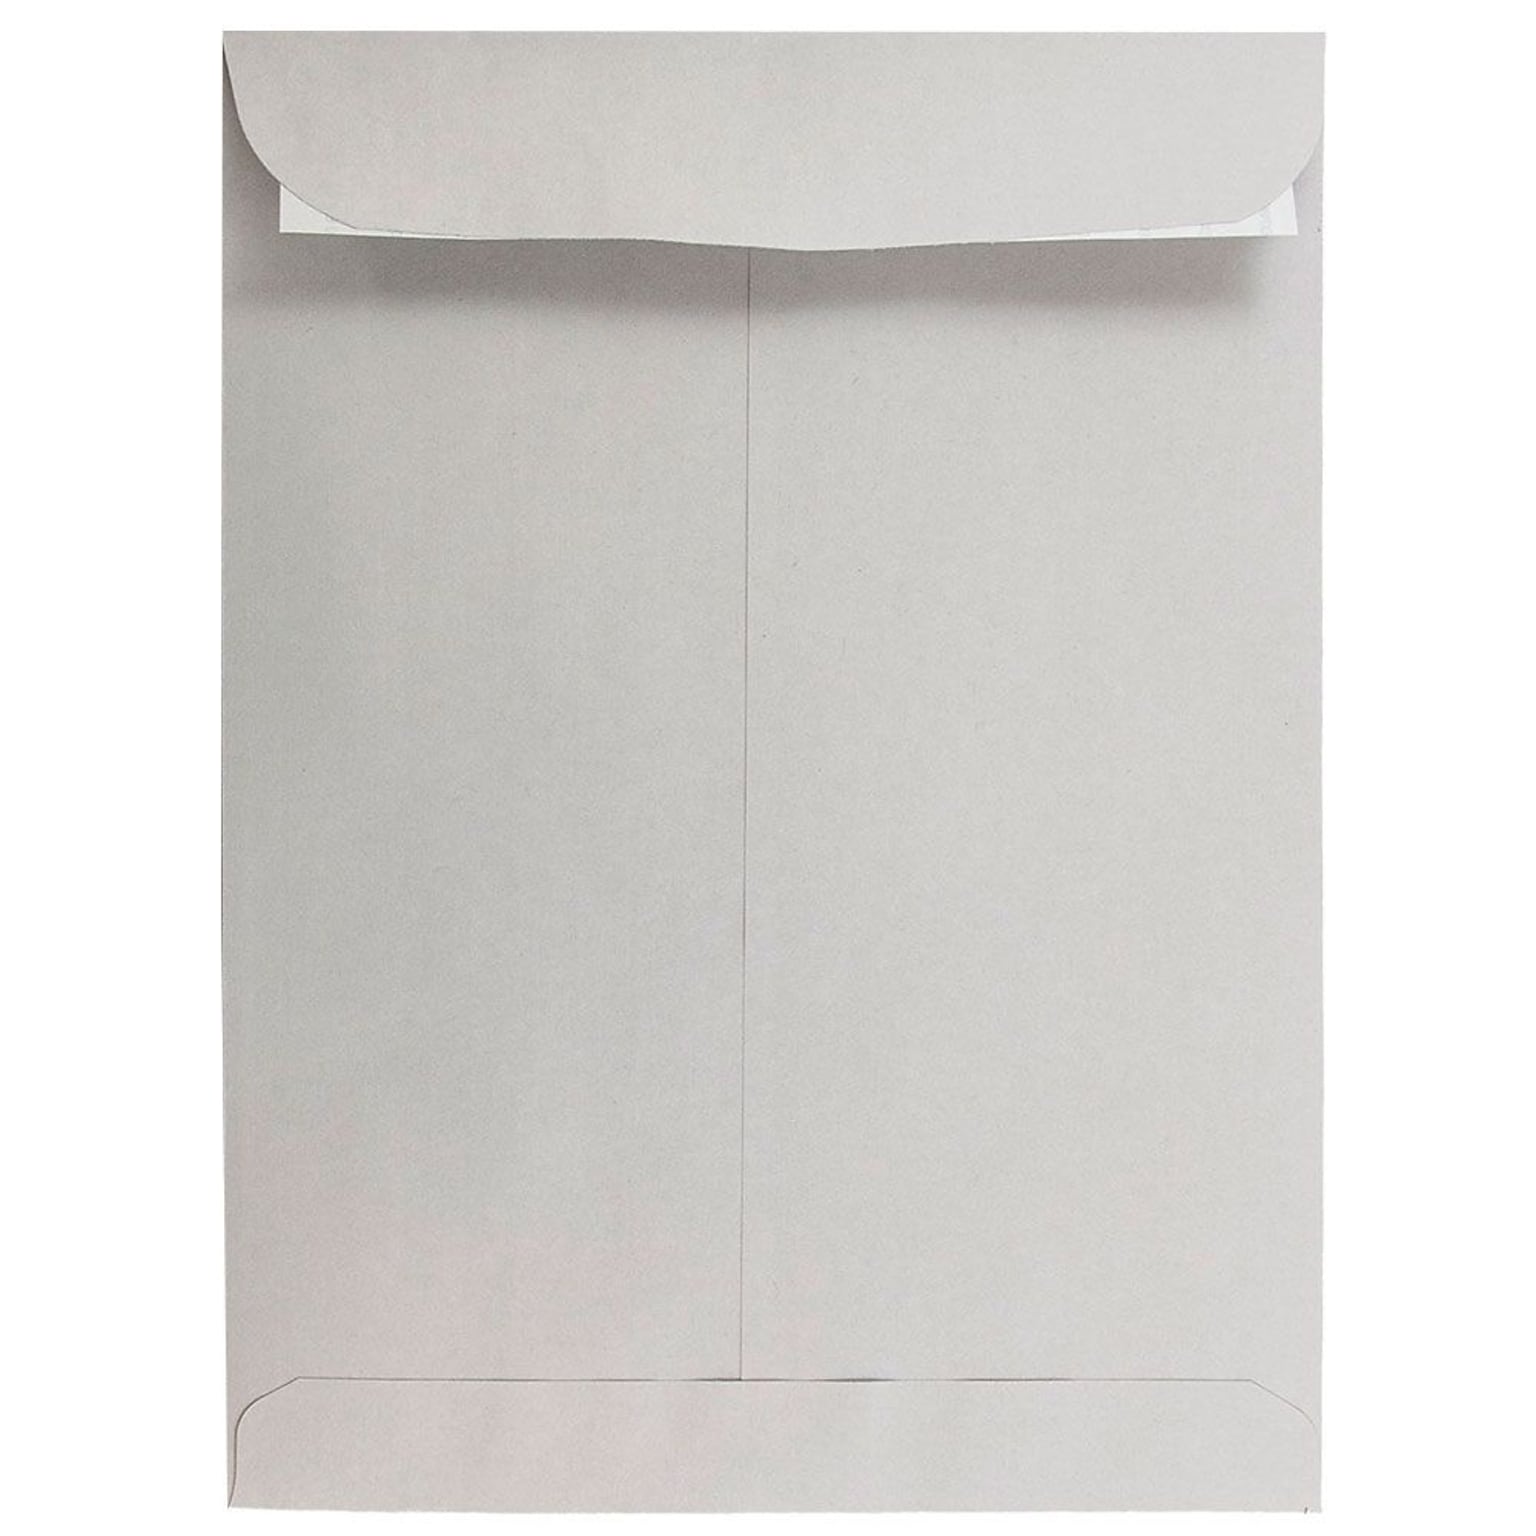 JAM Paper 9 x 12 Open End Catalog Envelopes with Peel and Seal Closure, Light Grey, 25/Pack (12931115a)